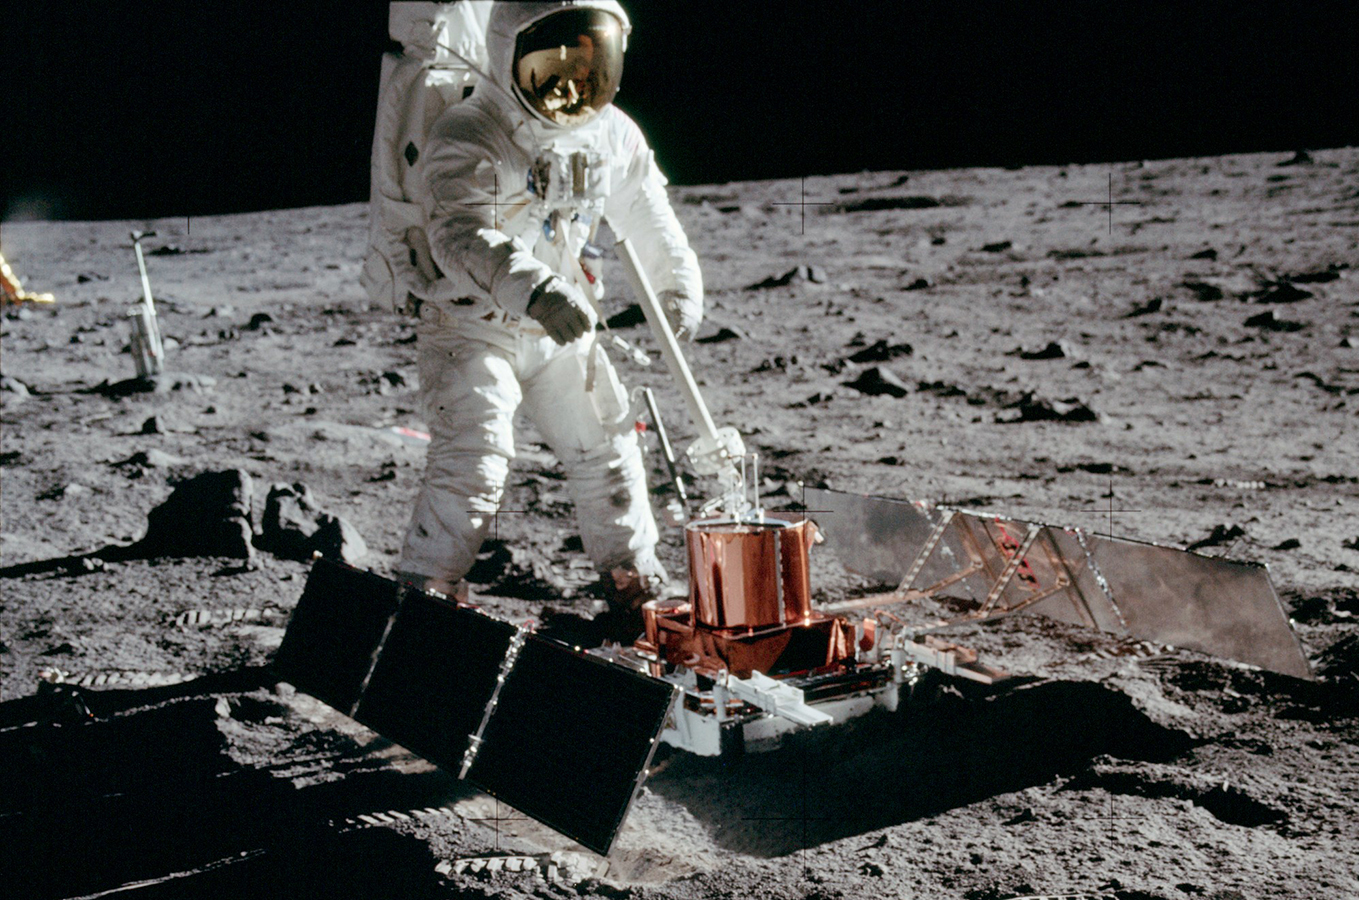 Buzz Aldrin with the seismic experiment during the Apollo 11 mission in 1969. Credit: NASA.